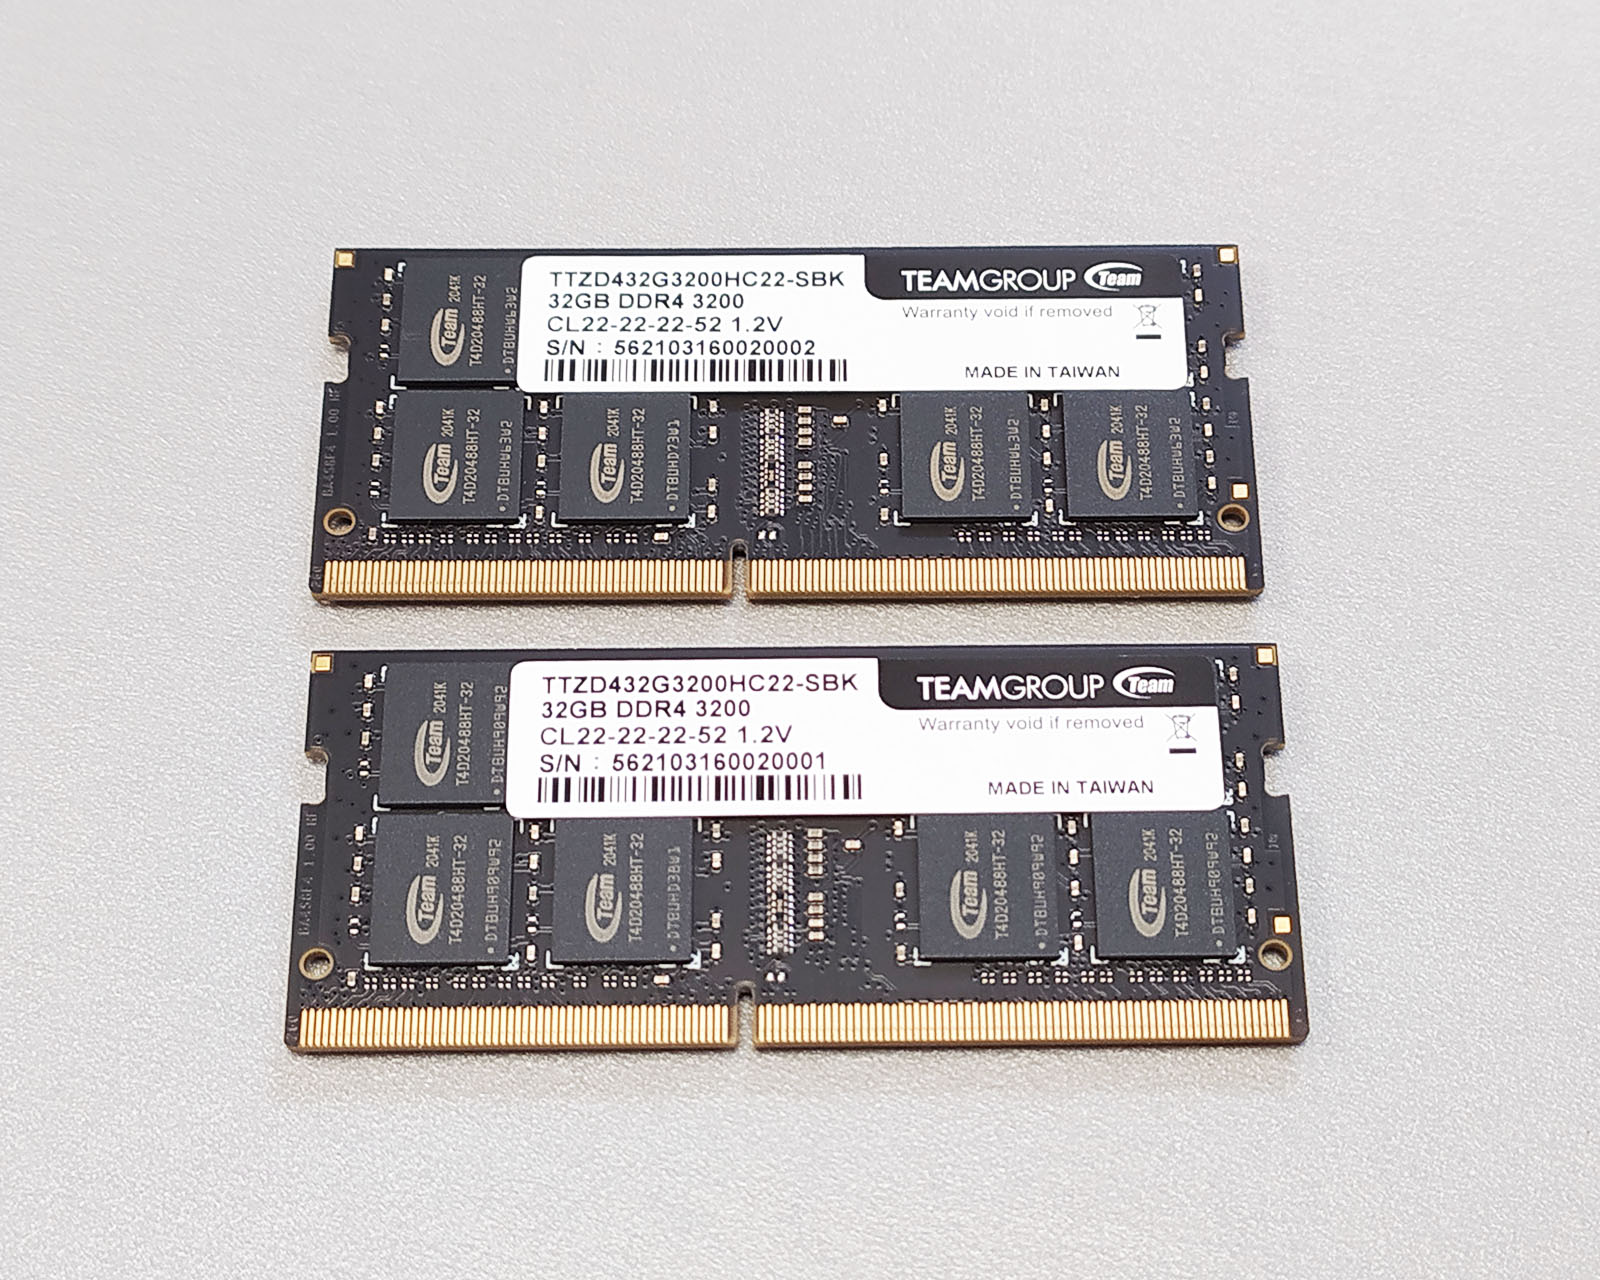 ZEUS DDR4 LAPTOP MEMORY 32GB(2x16GB) 3200MHz CL16 - TEAMGROUP